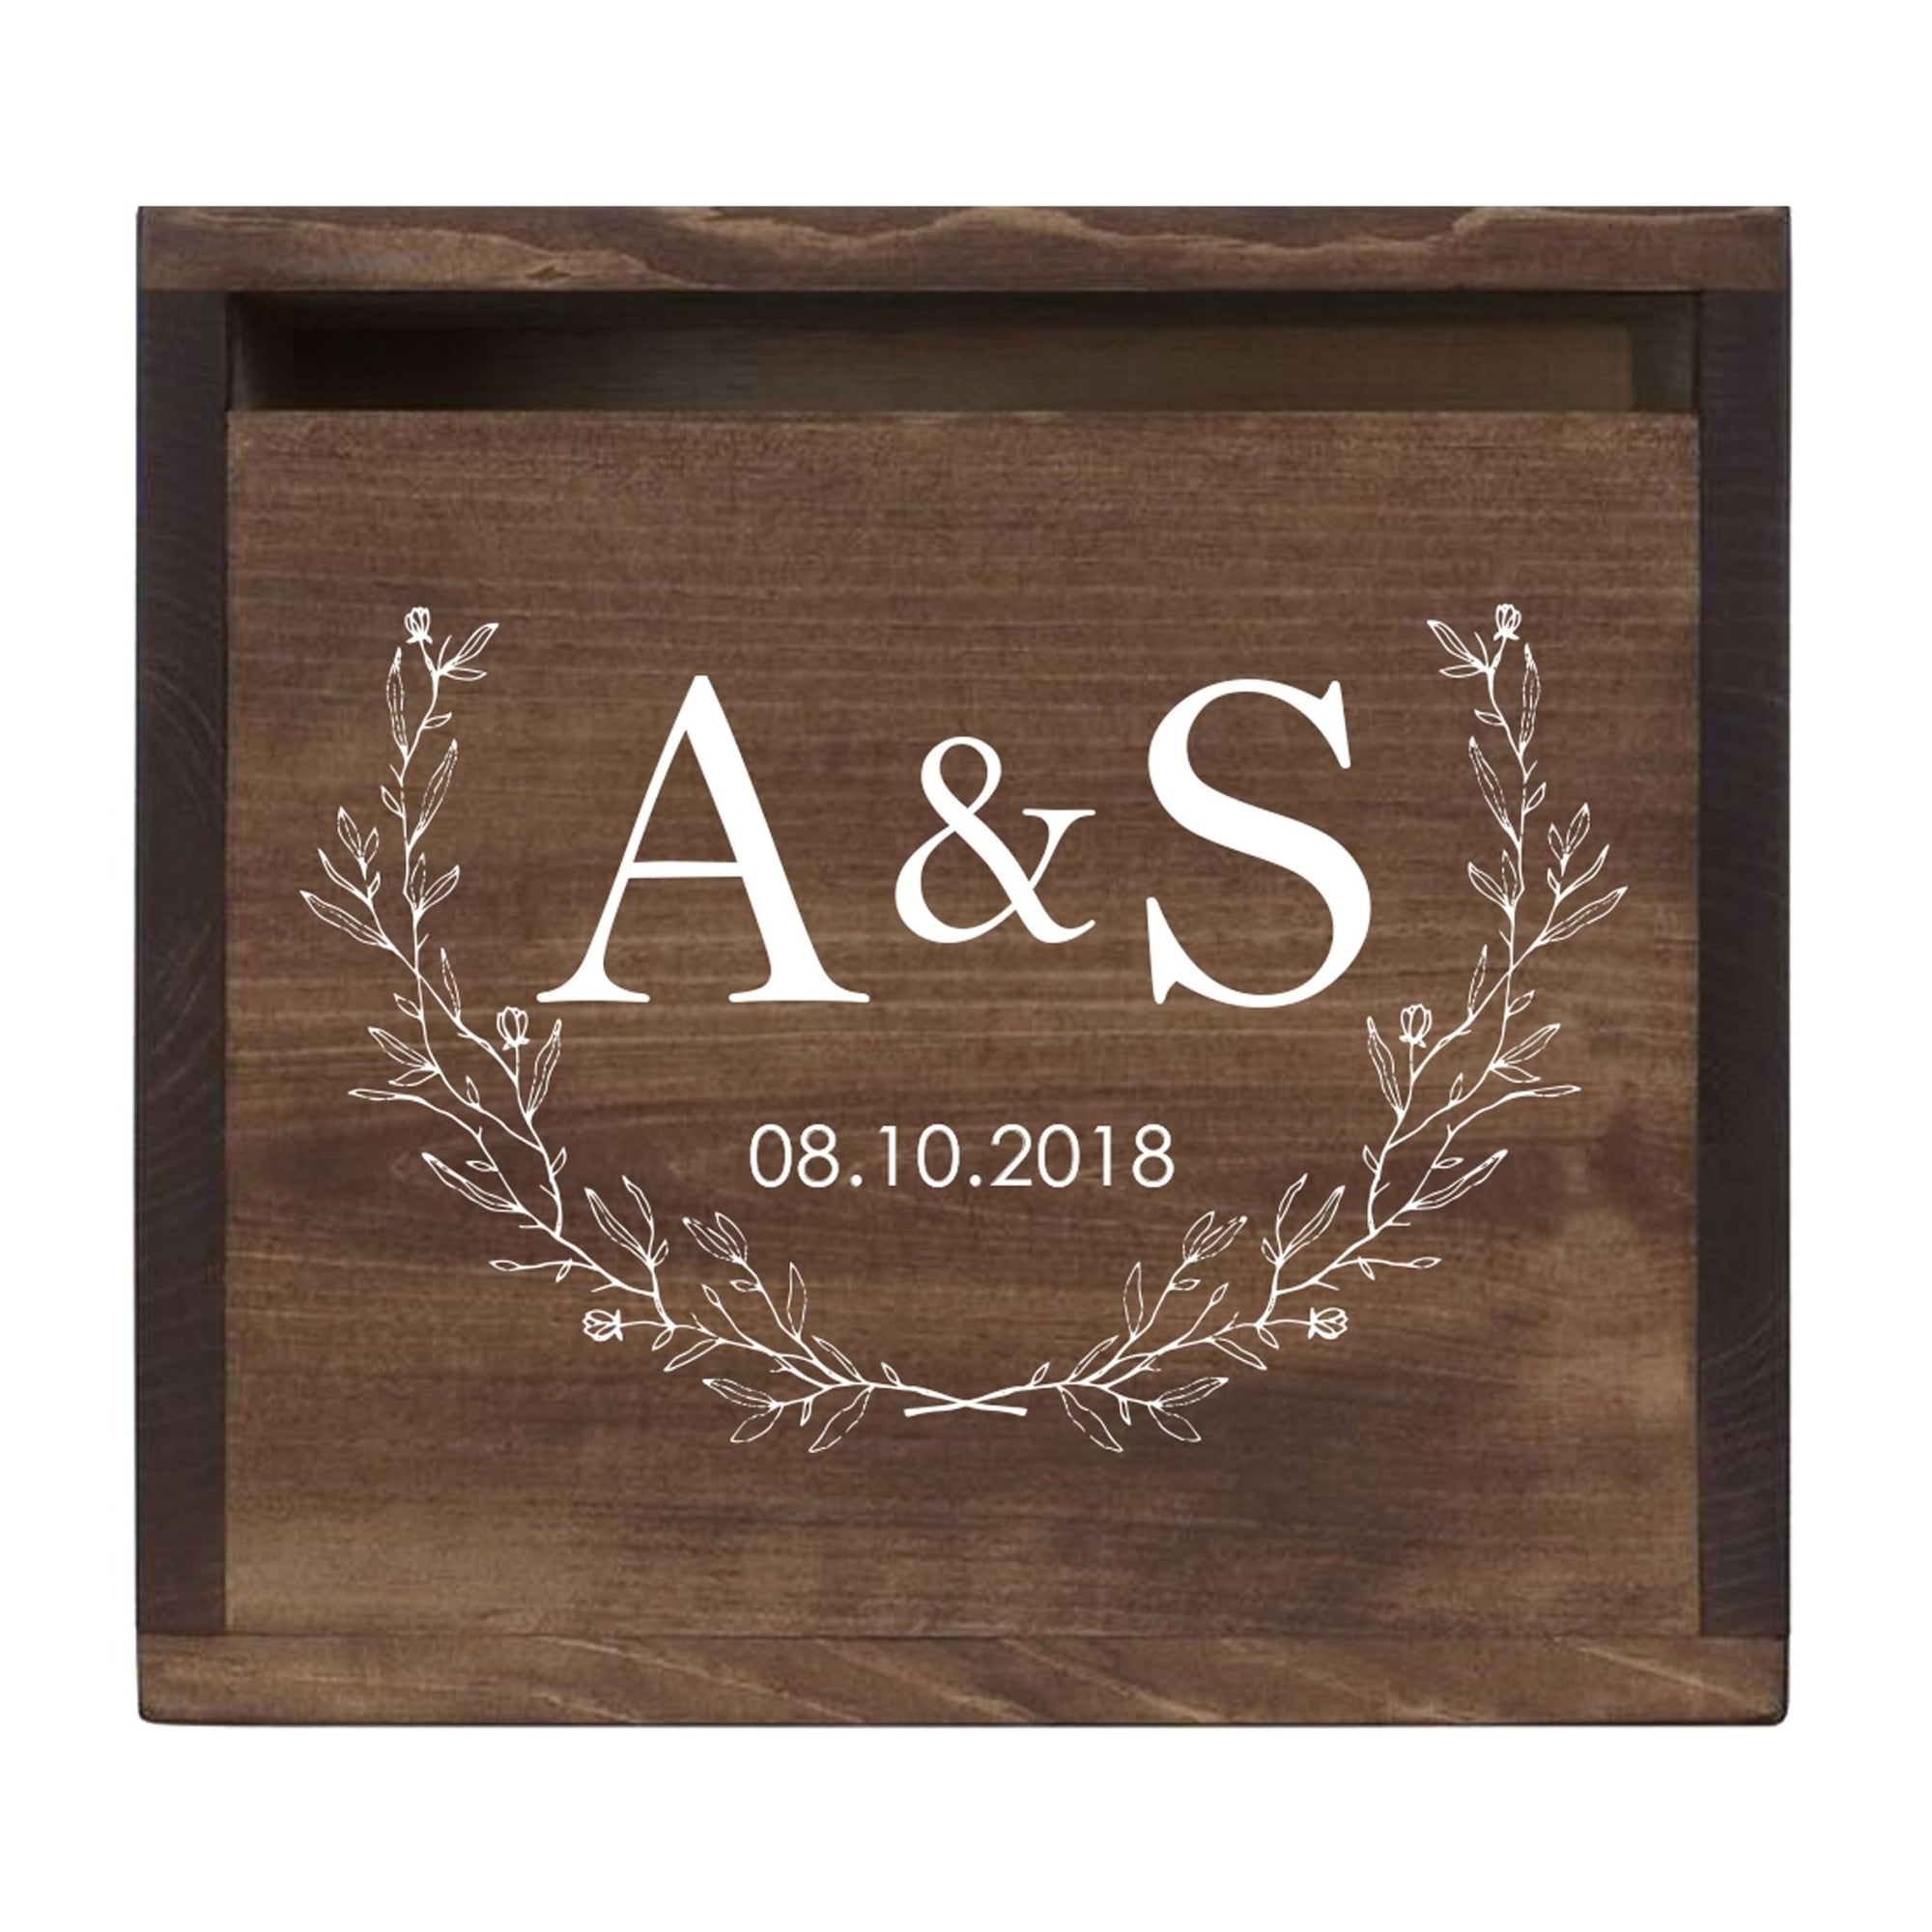 Personalized Wooden Card Box for Wedding Ceremonies, Venues, Receptions, Bridal Showers, and Engagement Parties 13.5x12 - A&S (Leaves) - LifeSong Milestones